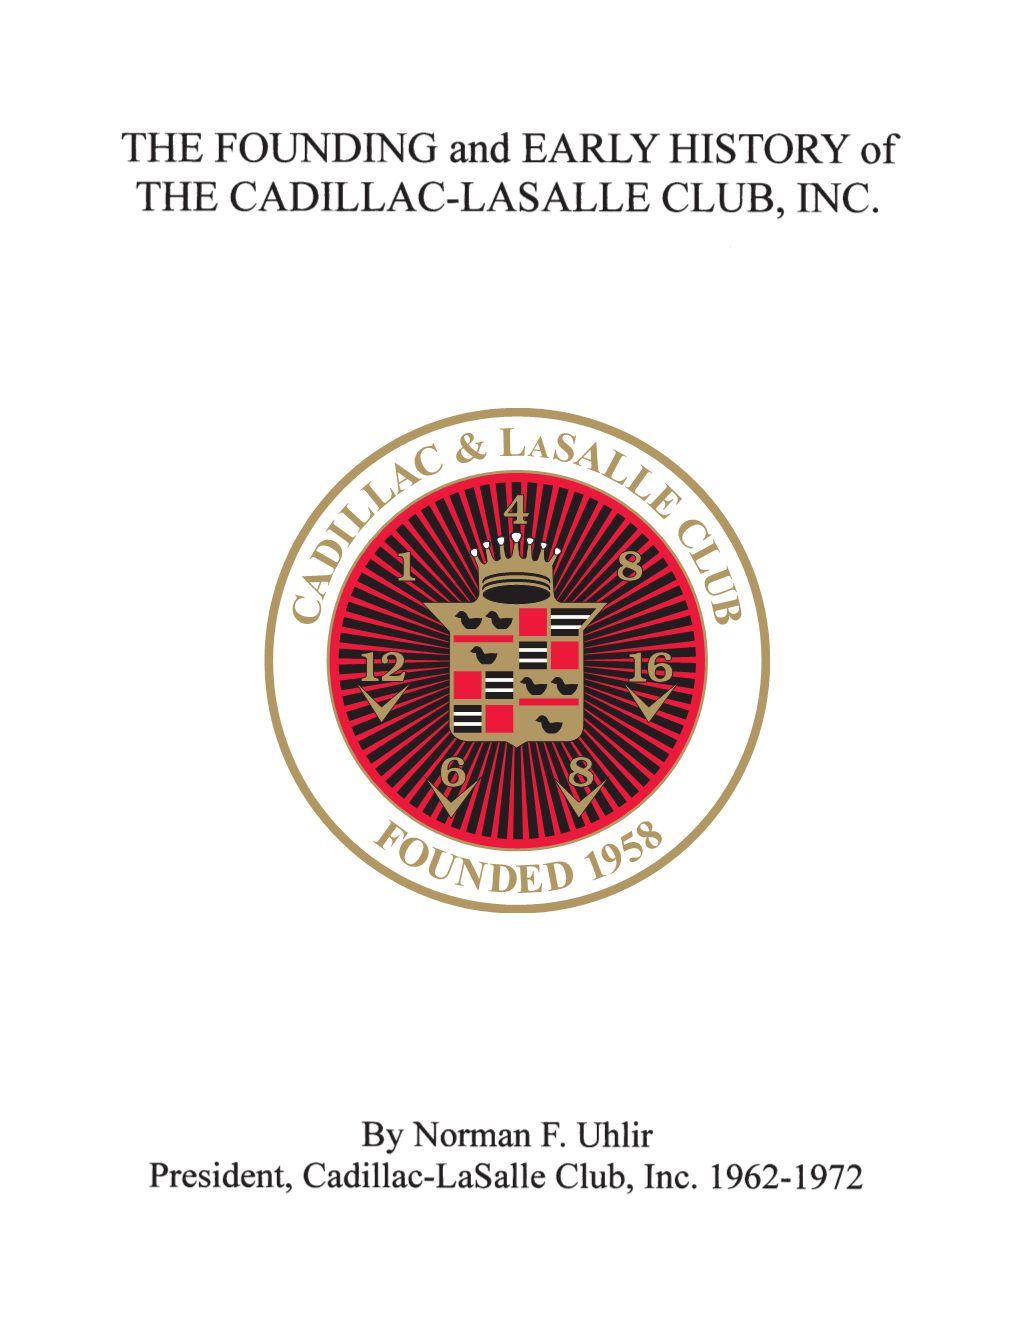 Early History of the Cadillac & Lasalle Club